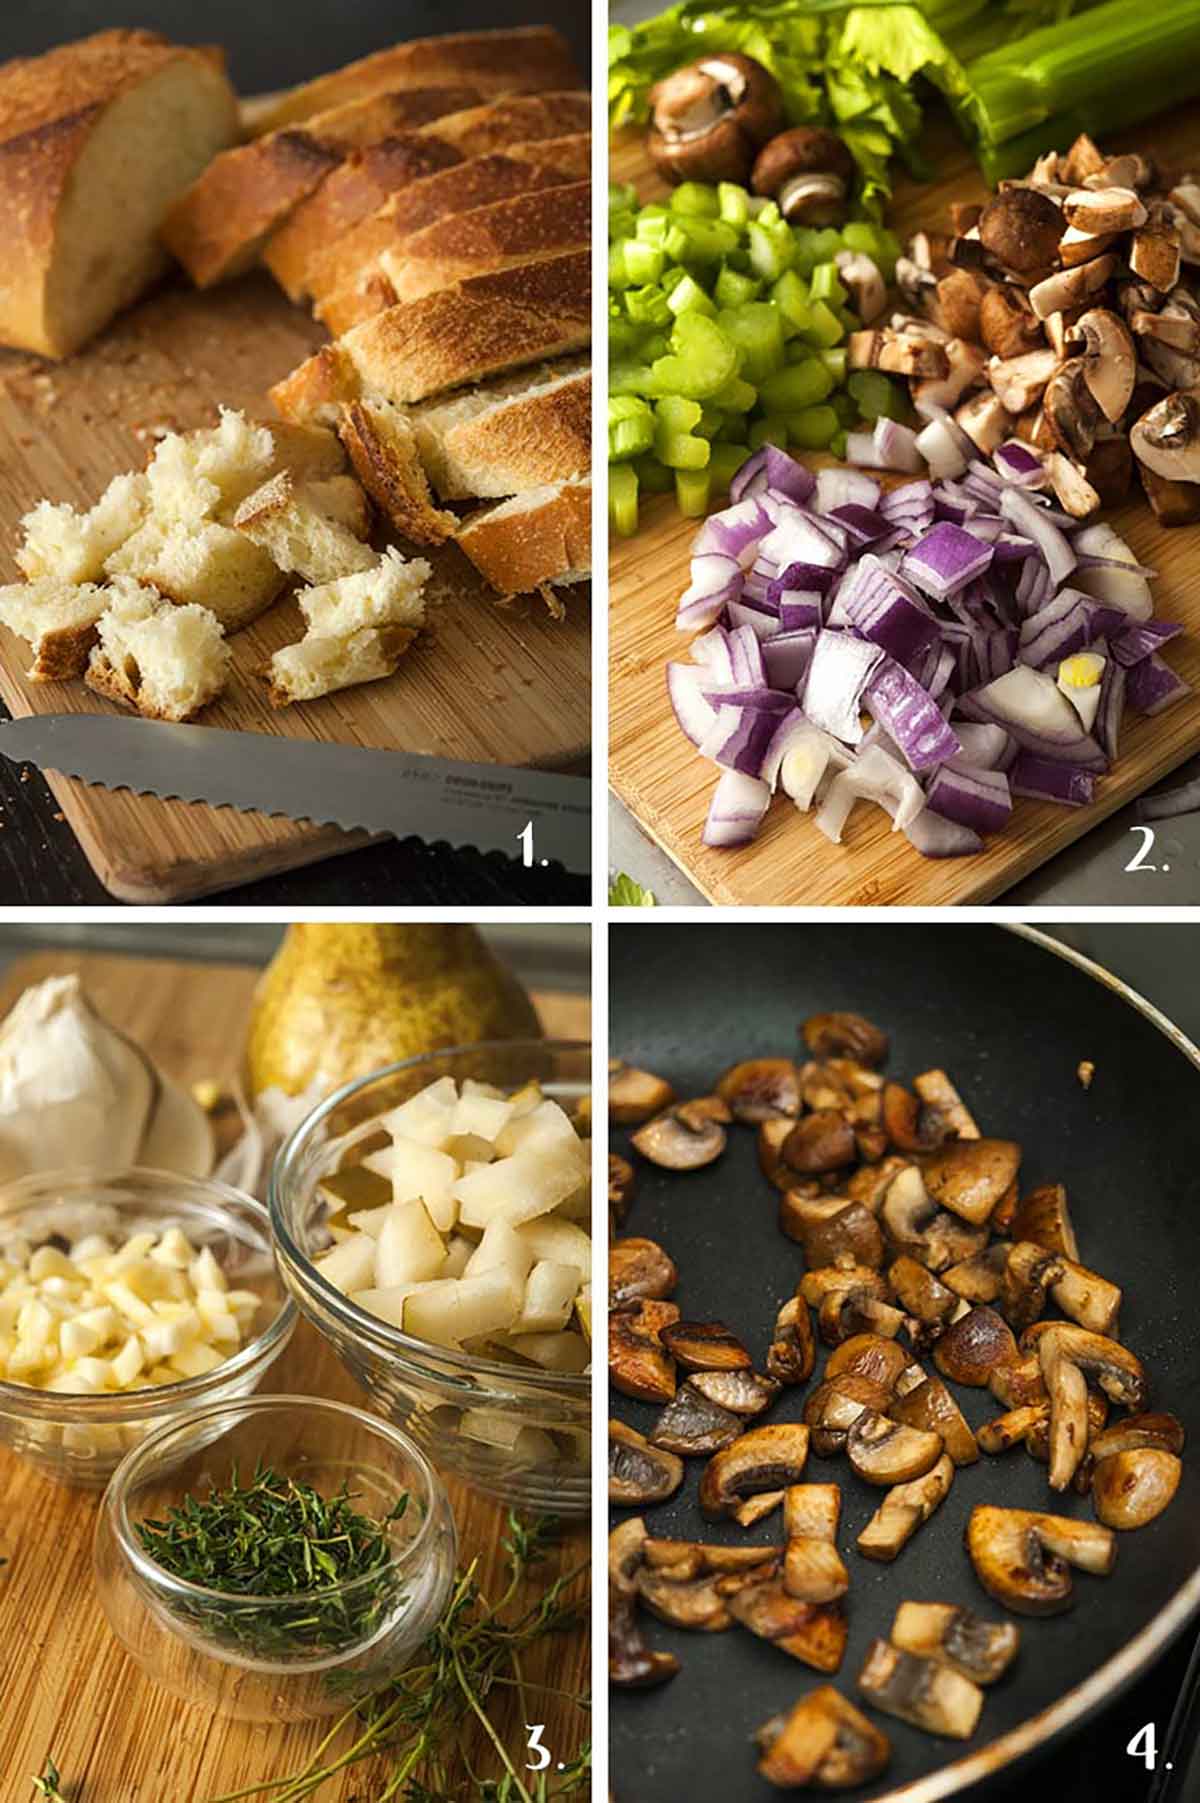 A collage of 4 numbered images showing cutting vegetables, pear and herbs, and cooking mushrooms.